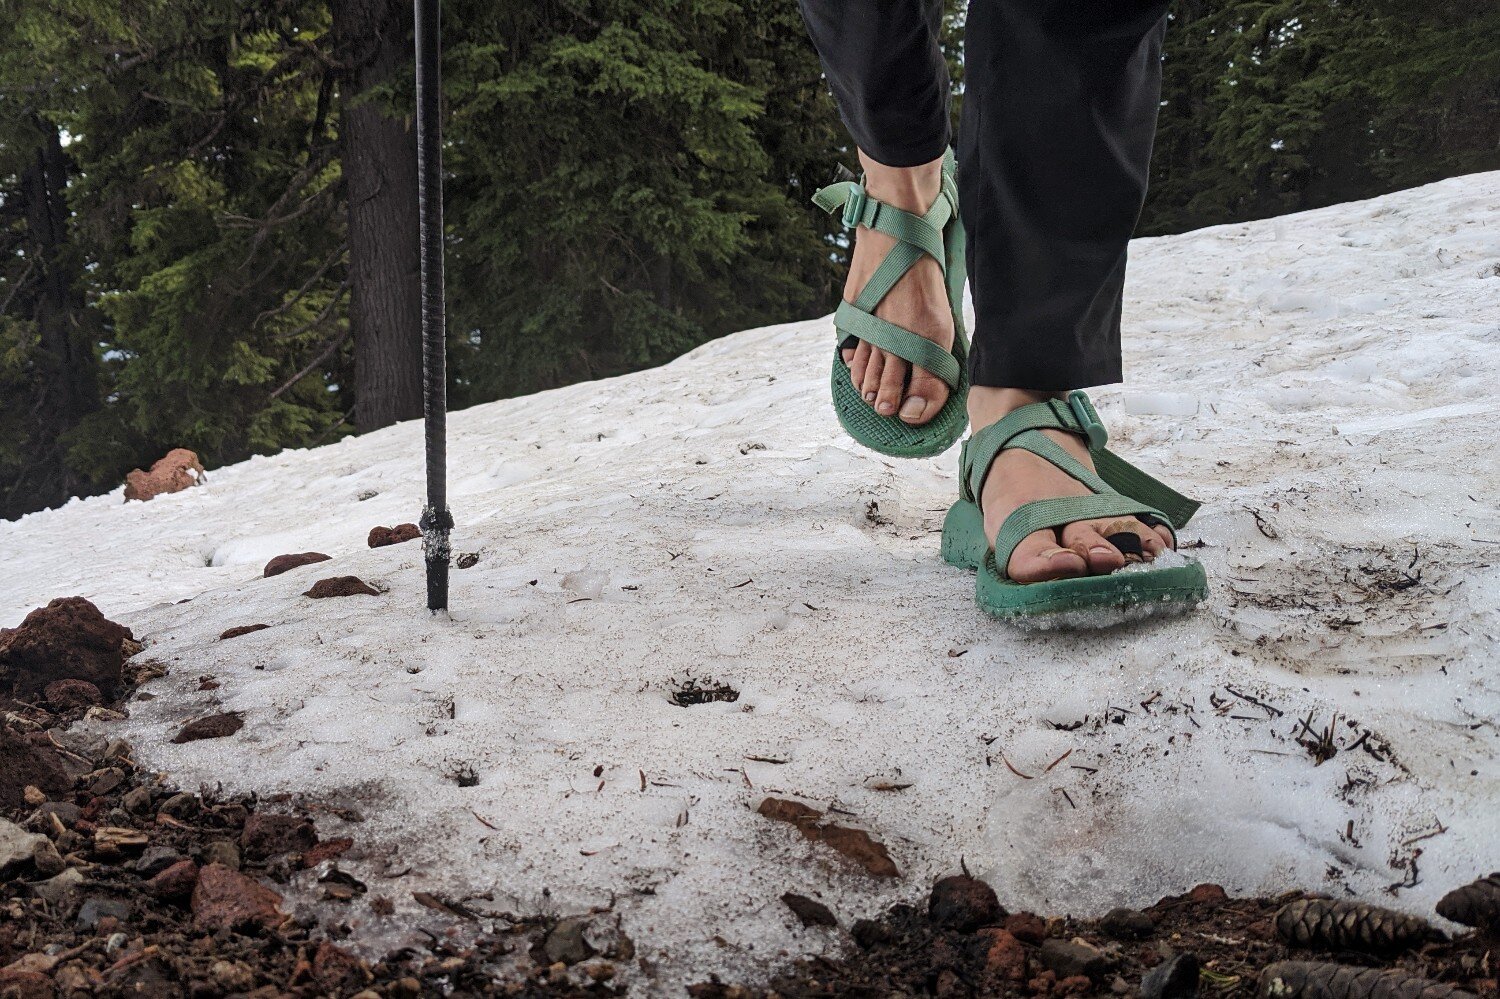 Don’t let the cold keep you from giving hiking sandals a try!